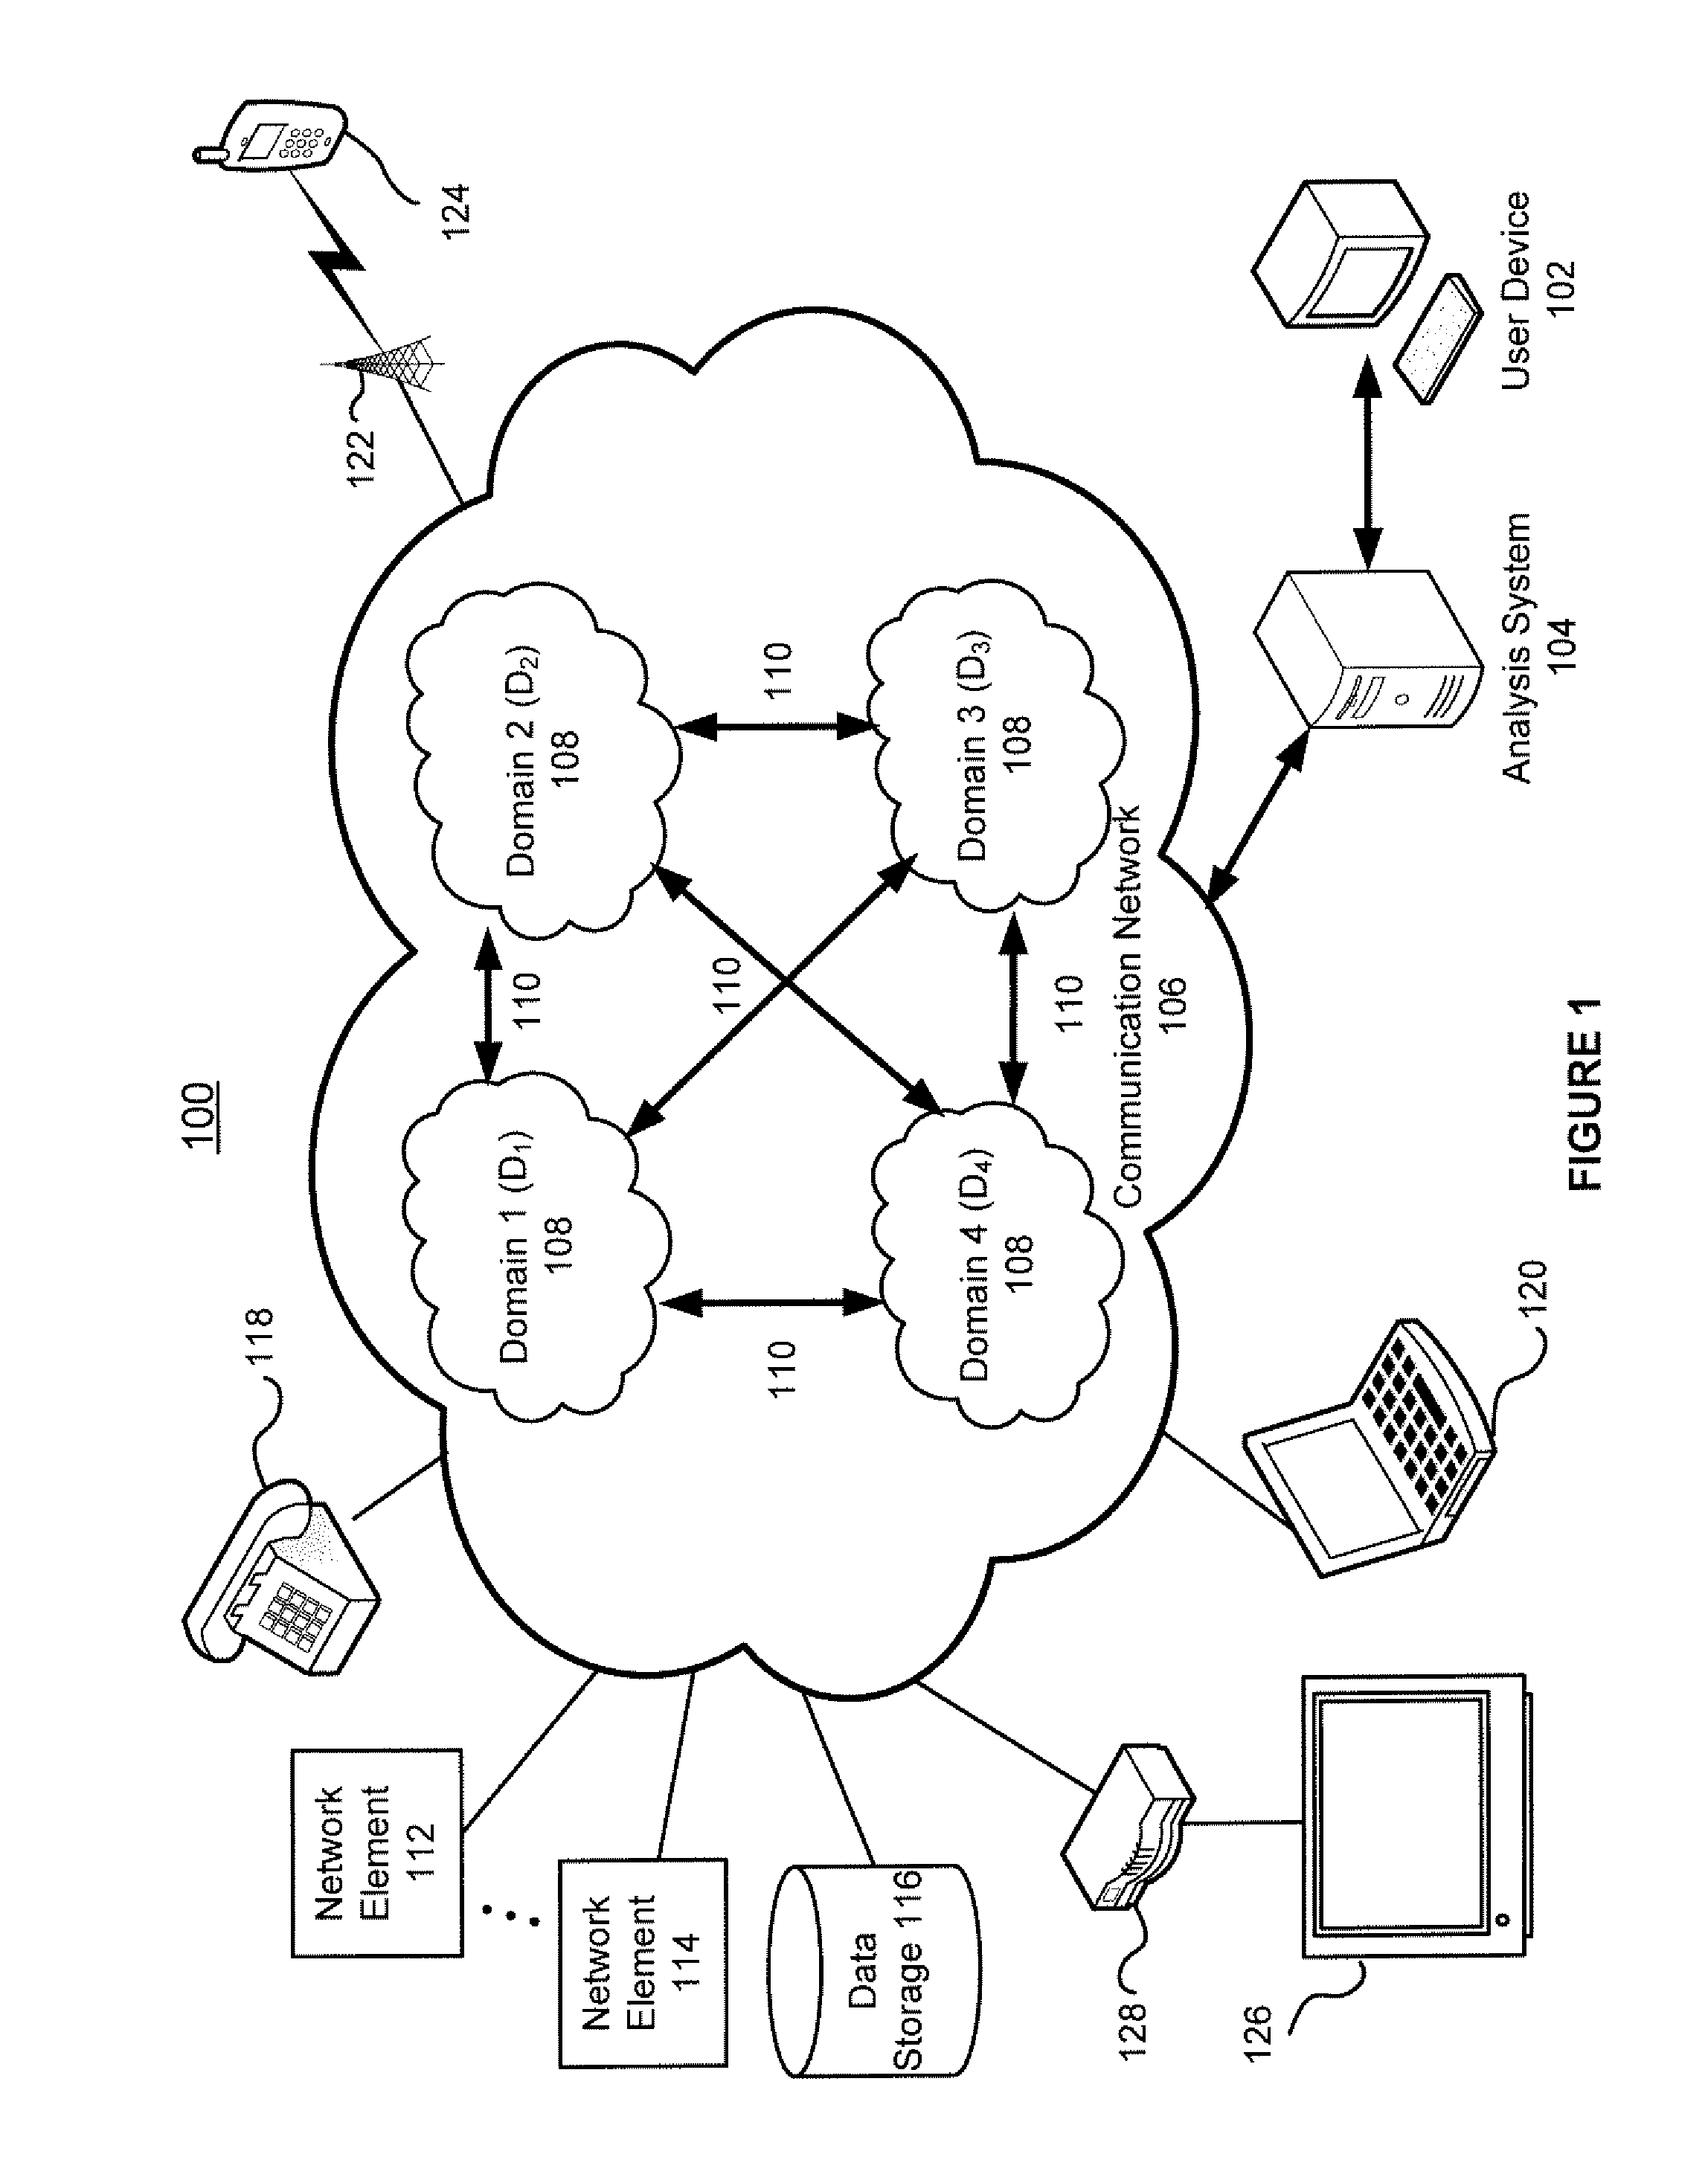 System and method for analyzing domino impact of network growth